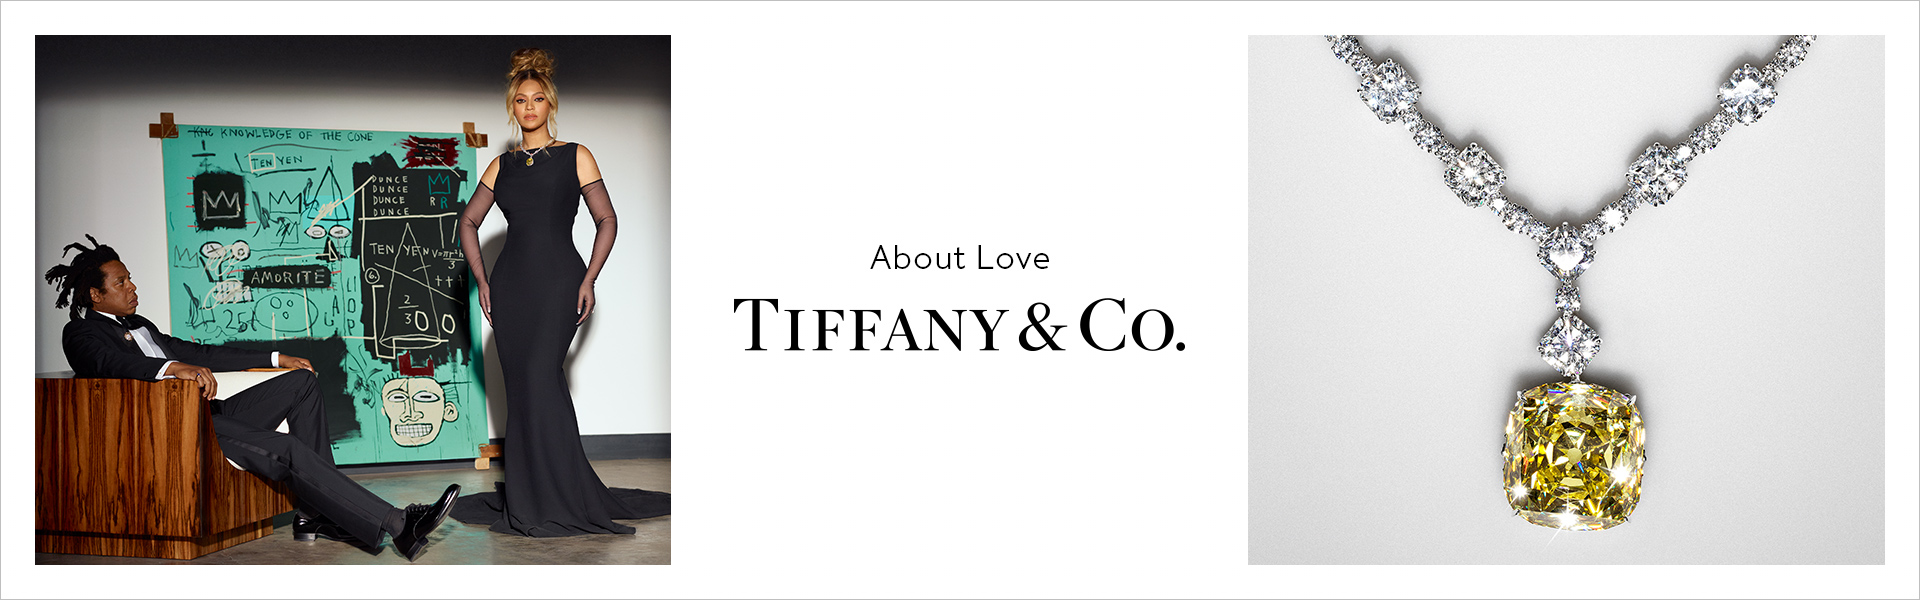 Tiffany & Co. Introduces the ABOUT LOVE Campaign Starring Beyoncé and  JAY-Z - Tiffany